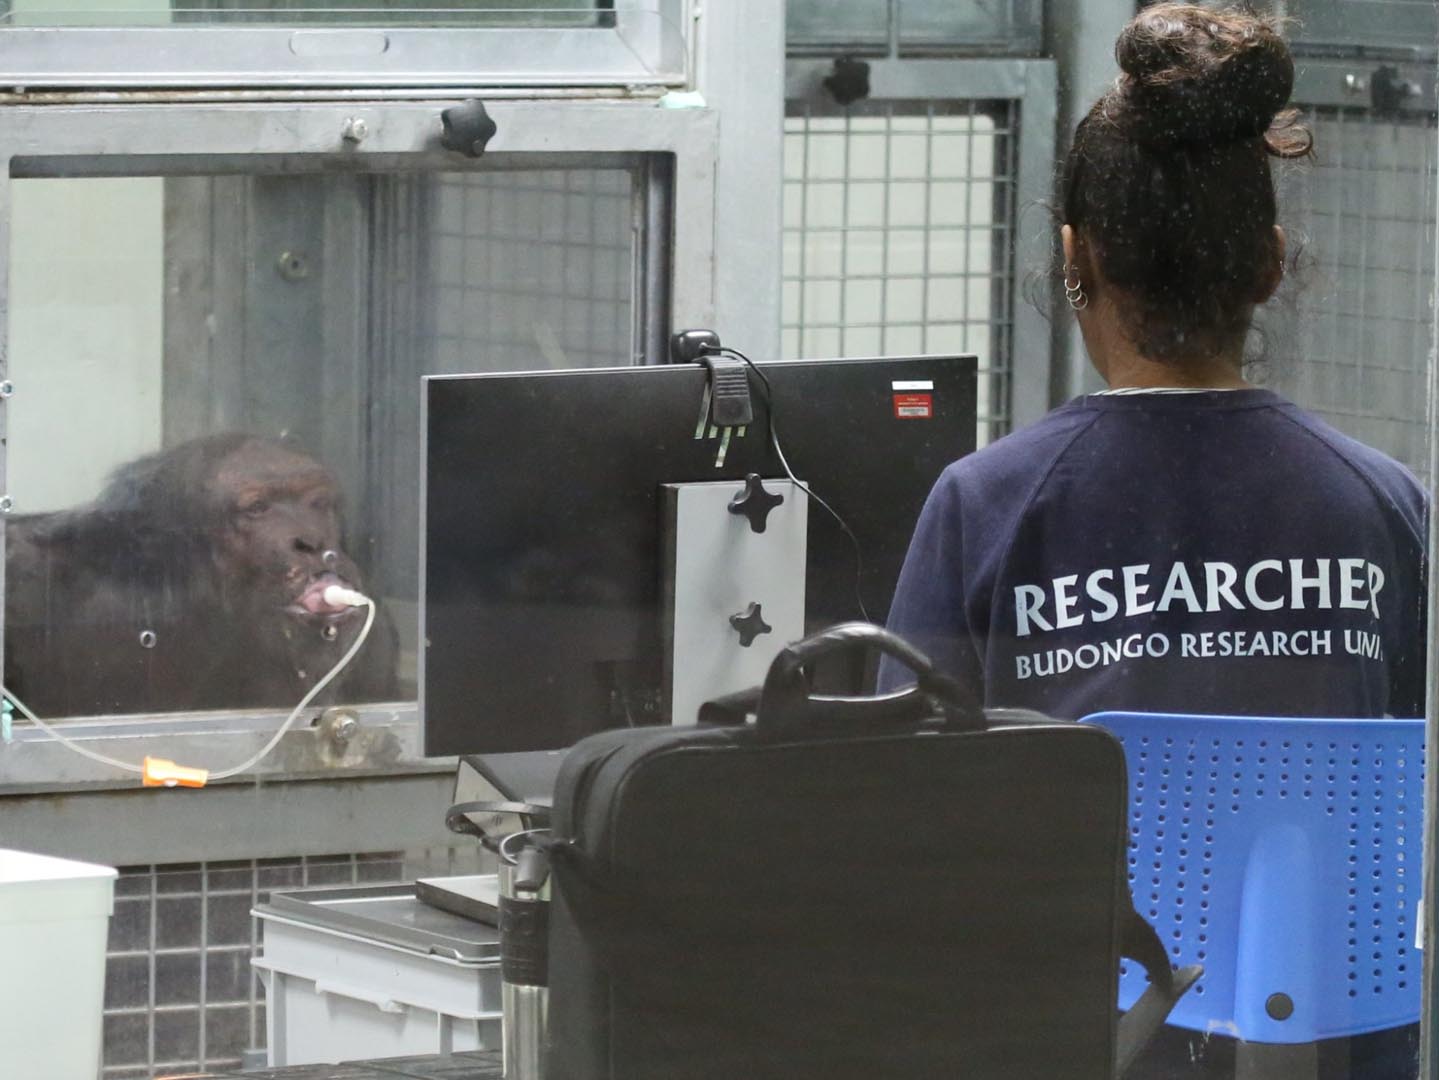 Budongo Research Unit researcher with chimpanzee taking part in voluntary test Image: RZSS 2021